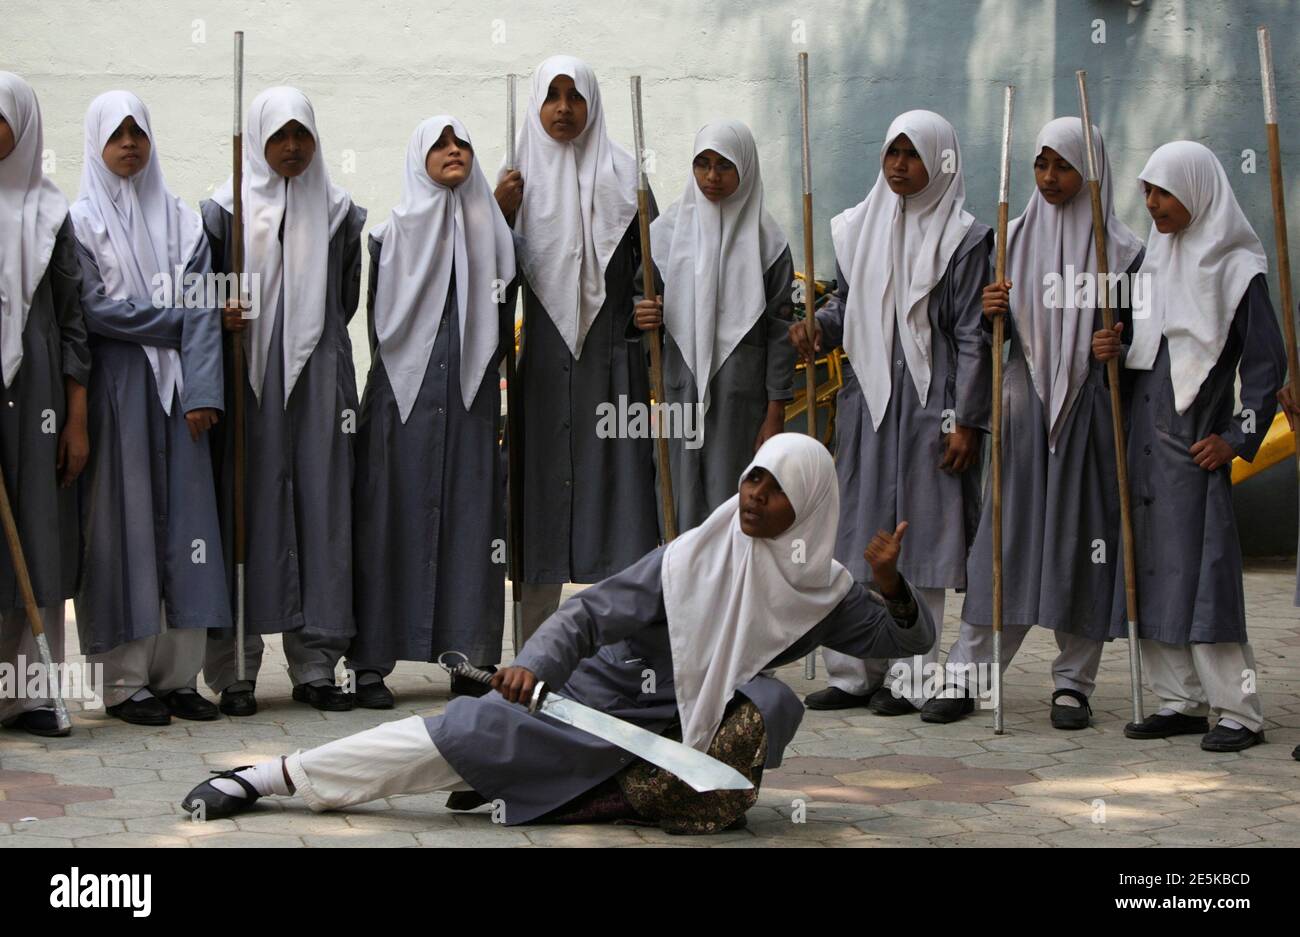 A Muslim schoolgirl from St. Maaz high school practises Vietnam Vovinam  martial arts inside the school compound on International Women's Day in the  southern Indian city of Hyderabad March 8, 2011. Girls